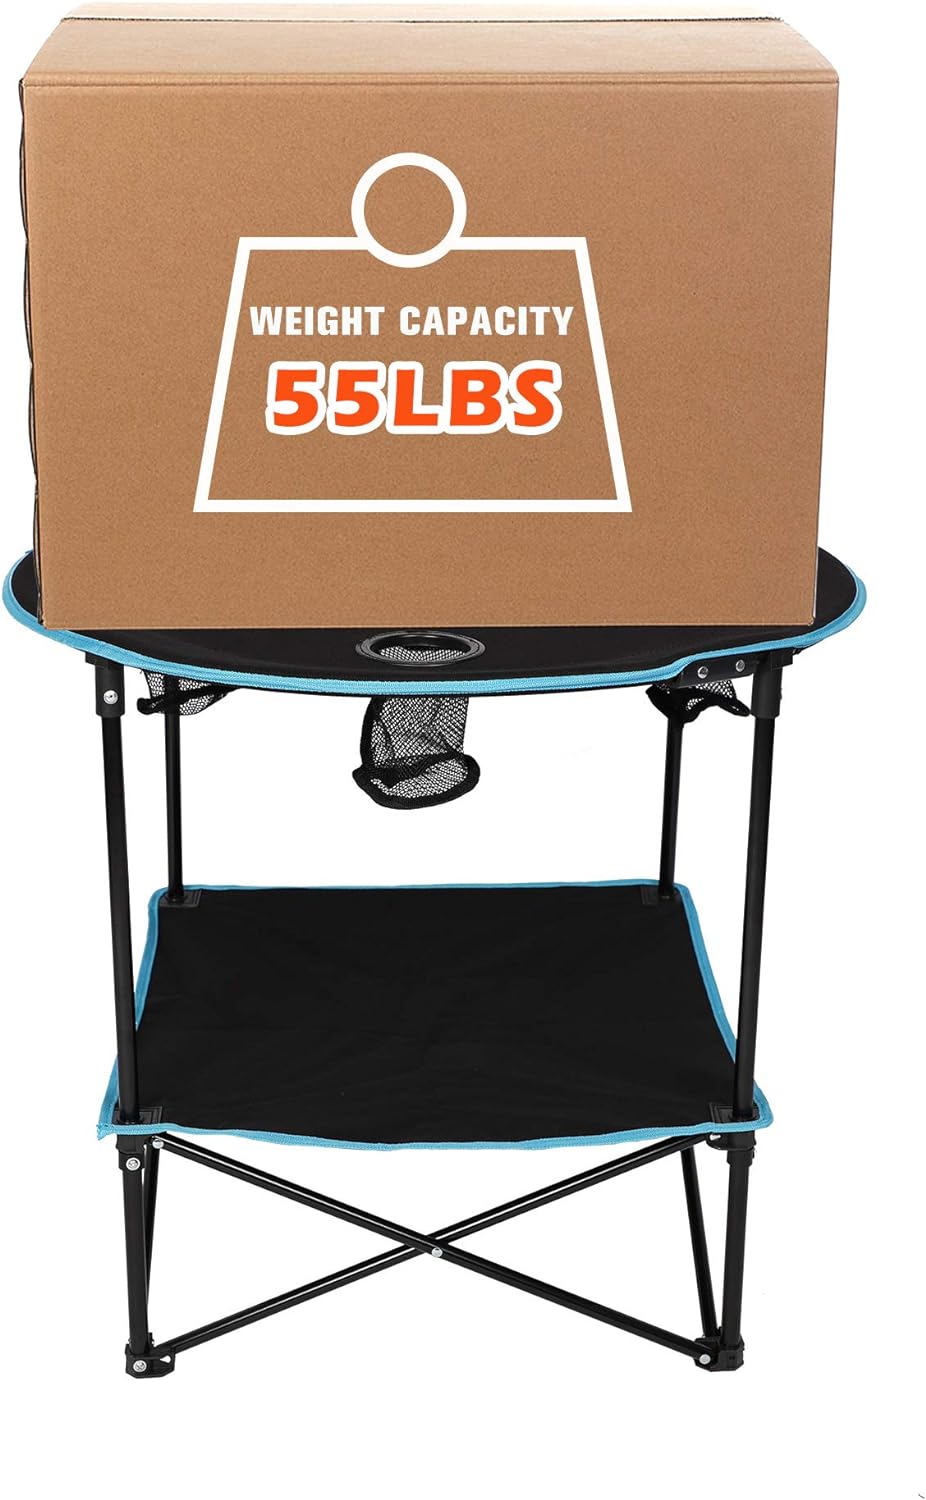 Round Outdoor Table Portable Small Folding Camping Table with Cup Holder and Carry Bag